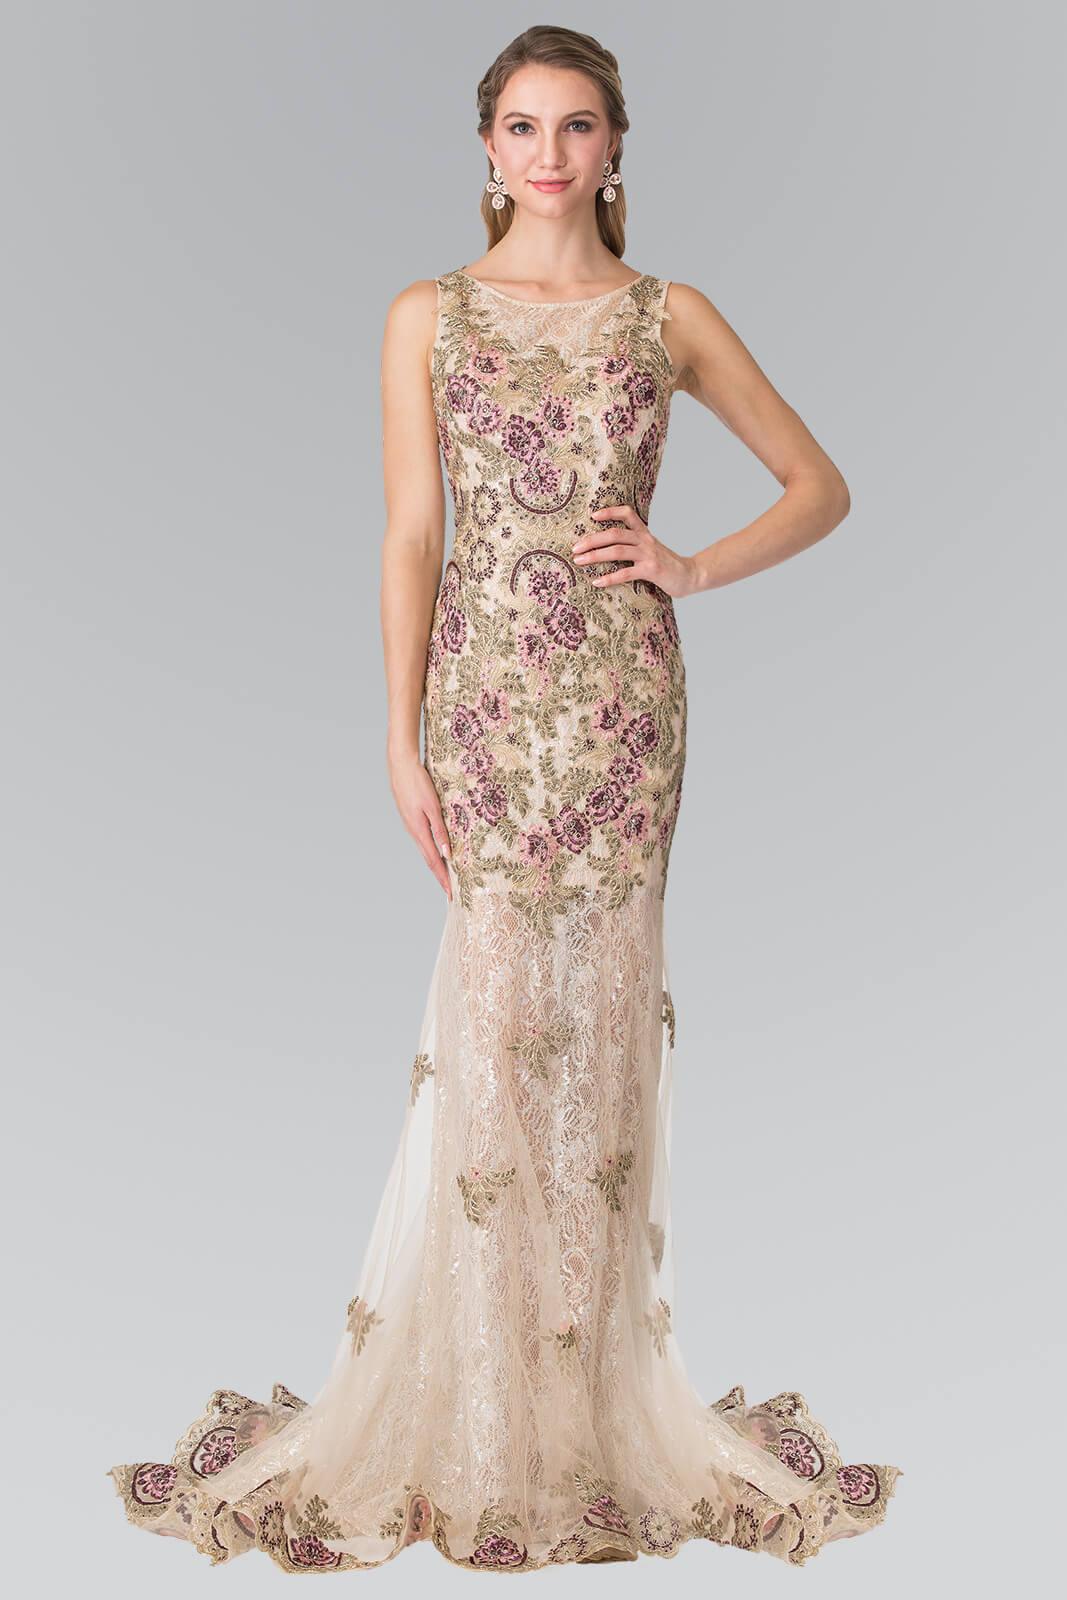 Long Formal Prom Dress Sale - The Dress Outlet